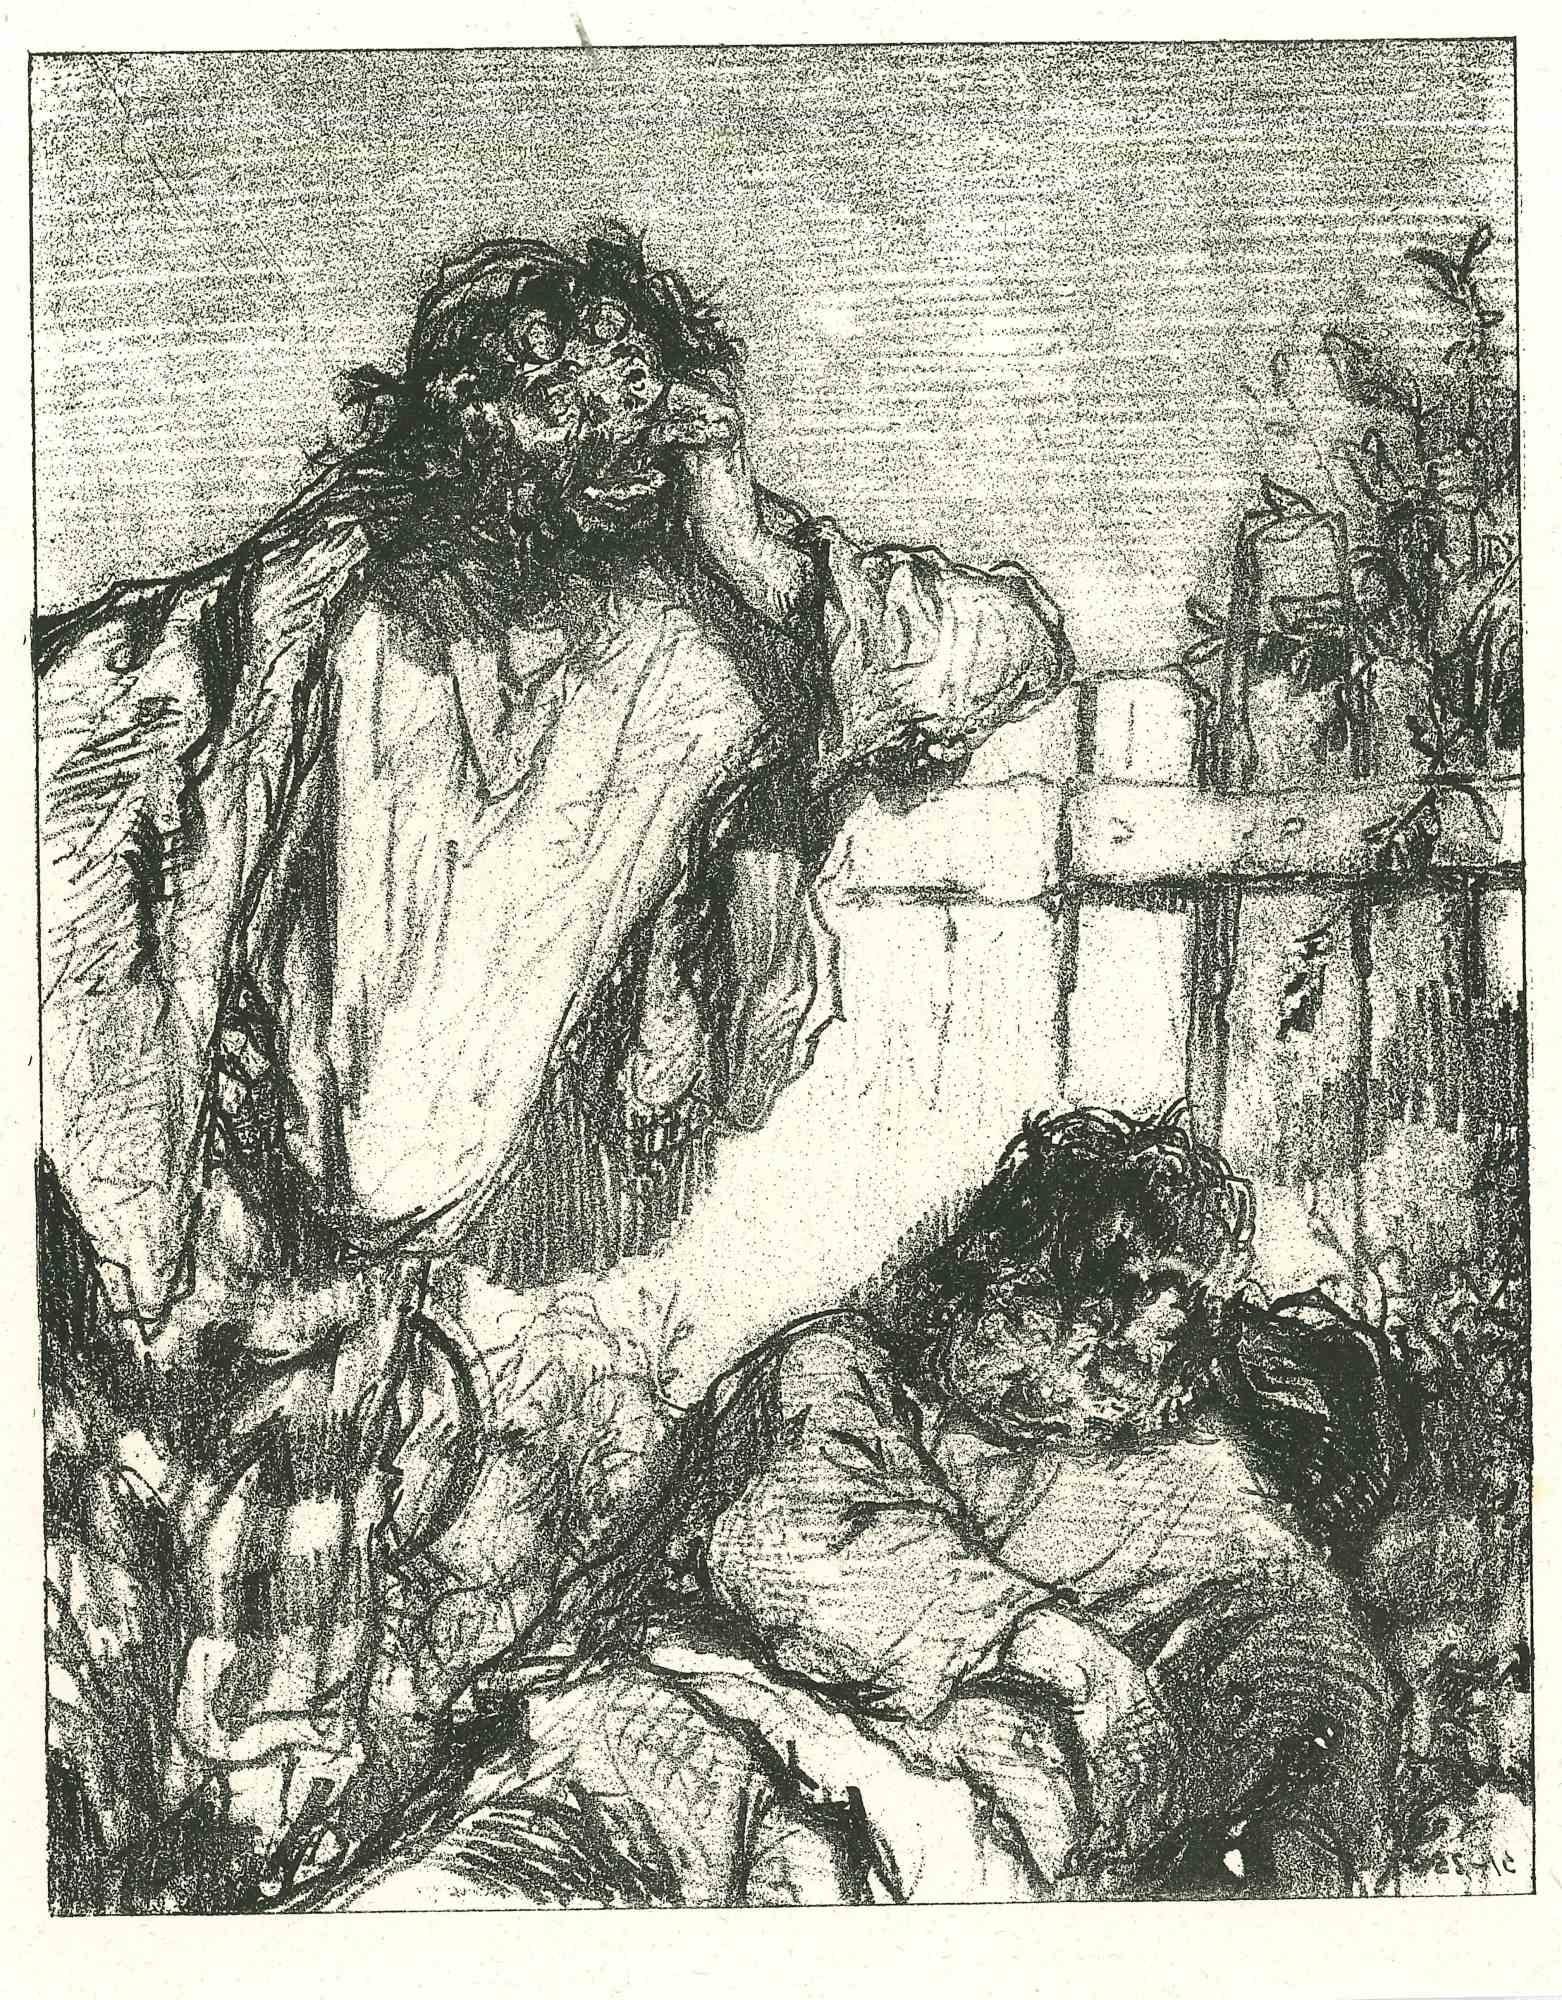 The Misery is an original lithograph artwork on ivory-colored paper, realized by the French draftsman Paul Gavarni (after) (alias Guillaume Sulpice Chevalier Gavarni, 1804-1866) in Paris, 1881, in the collection of Illustrations for "La Mascarade